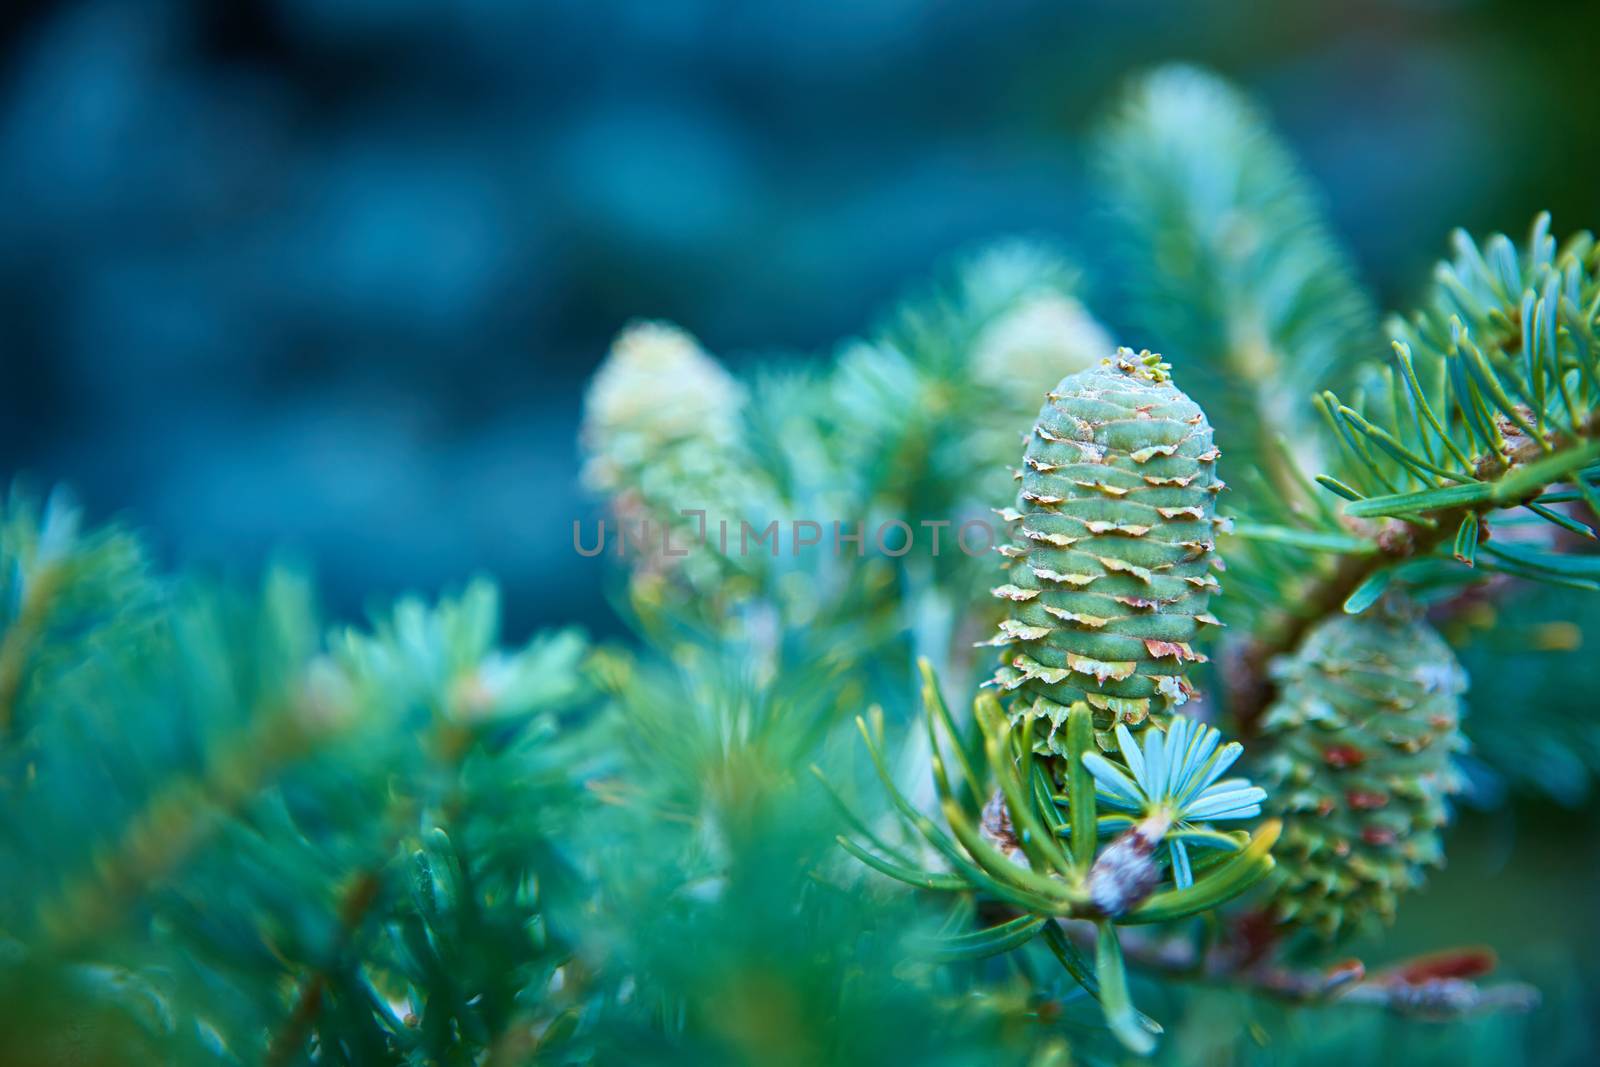 Young shoots of pine trees in the forest by sarymsakov